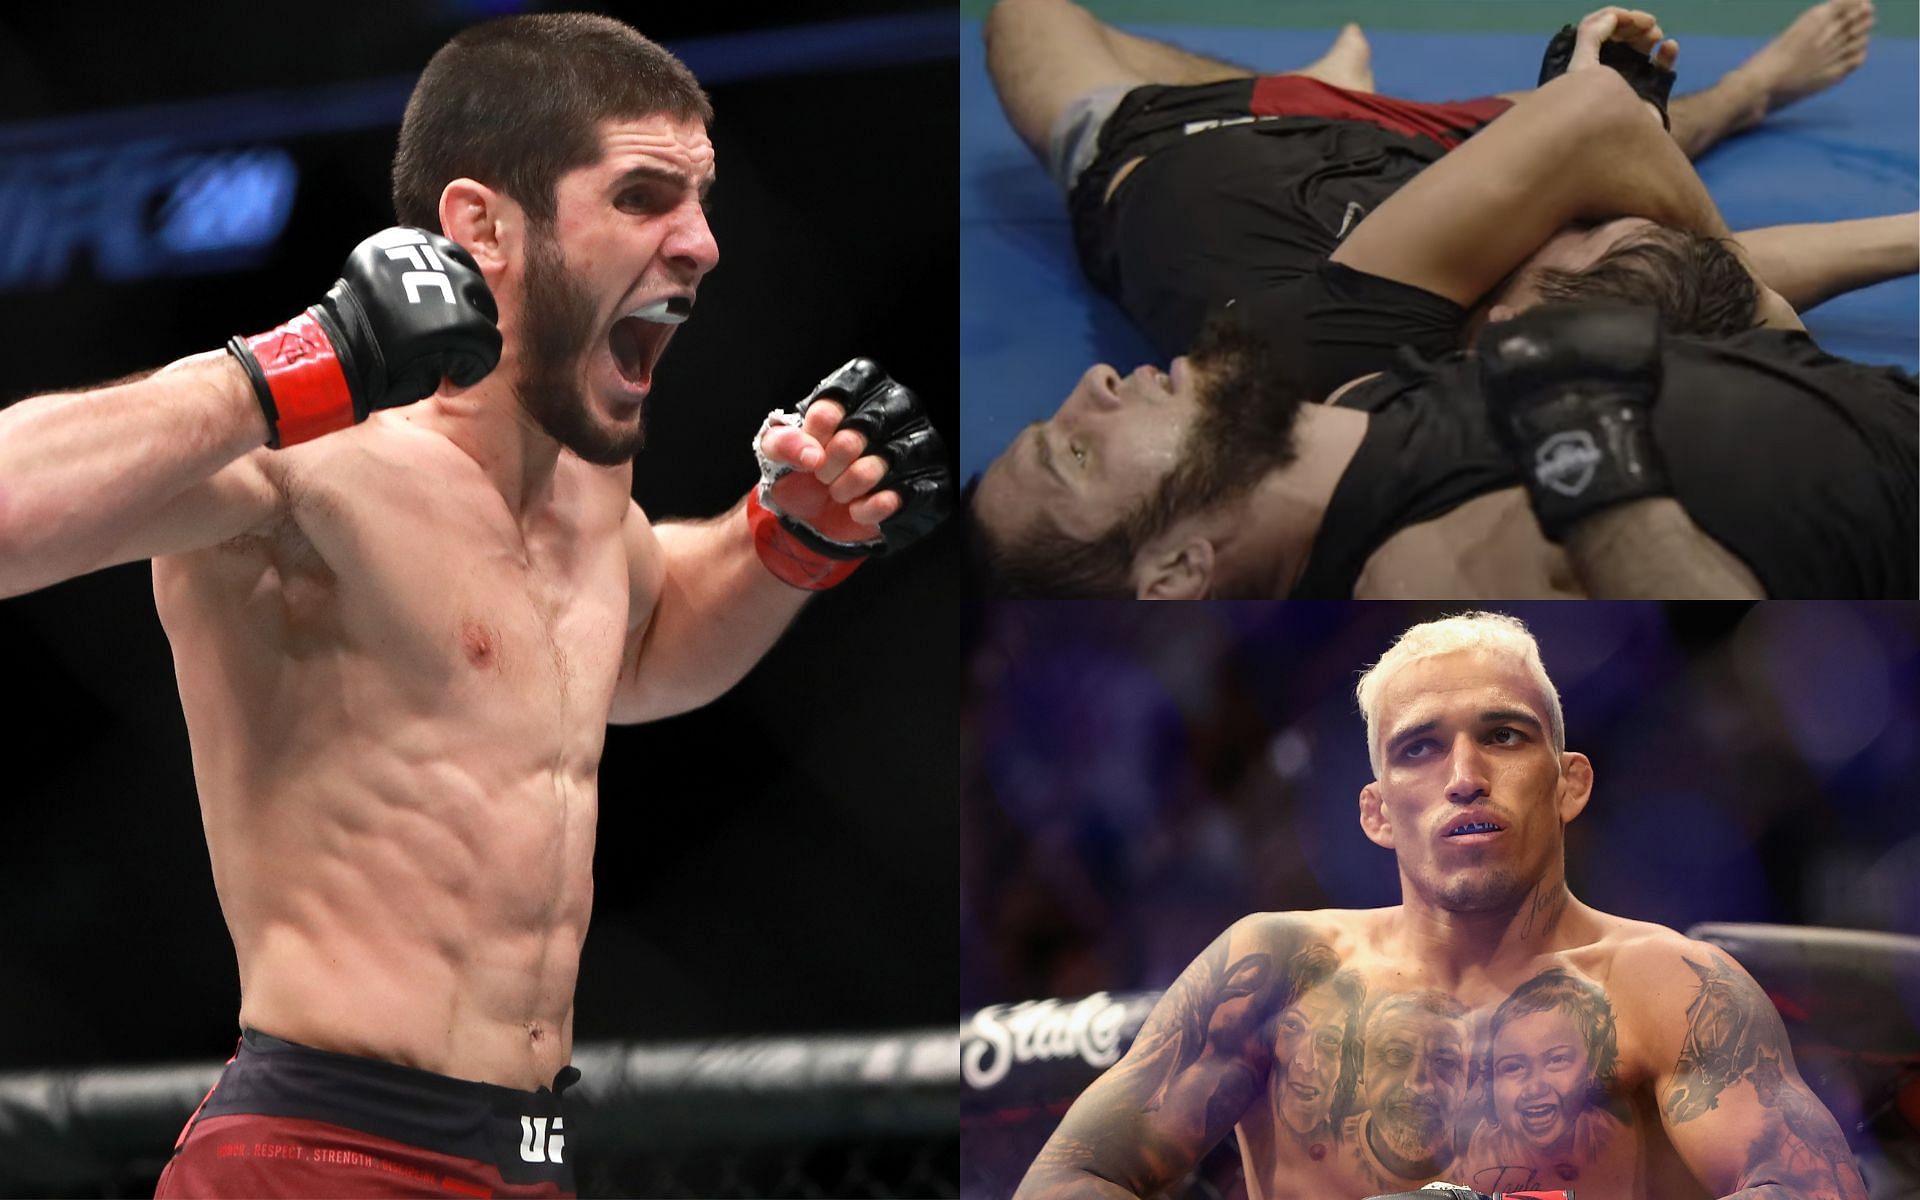 Islam Makhachev (Left), Makhachev and his sparring partner (Top Right), and Charles Oliveira (Bottom Right) [Image courtesy: left and bottom right images via Getty Images; top right image via Anatomy of a Fighter YouTube channel]